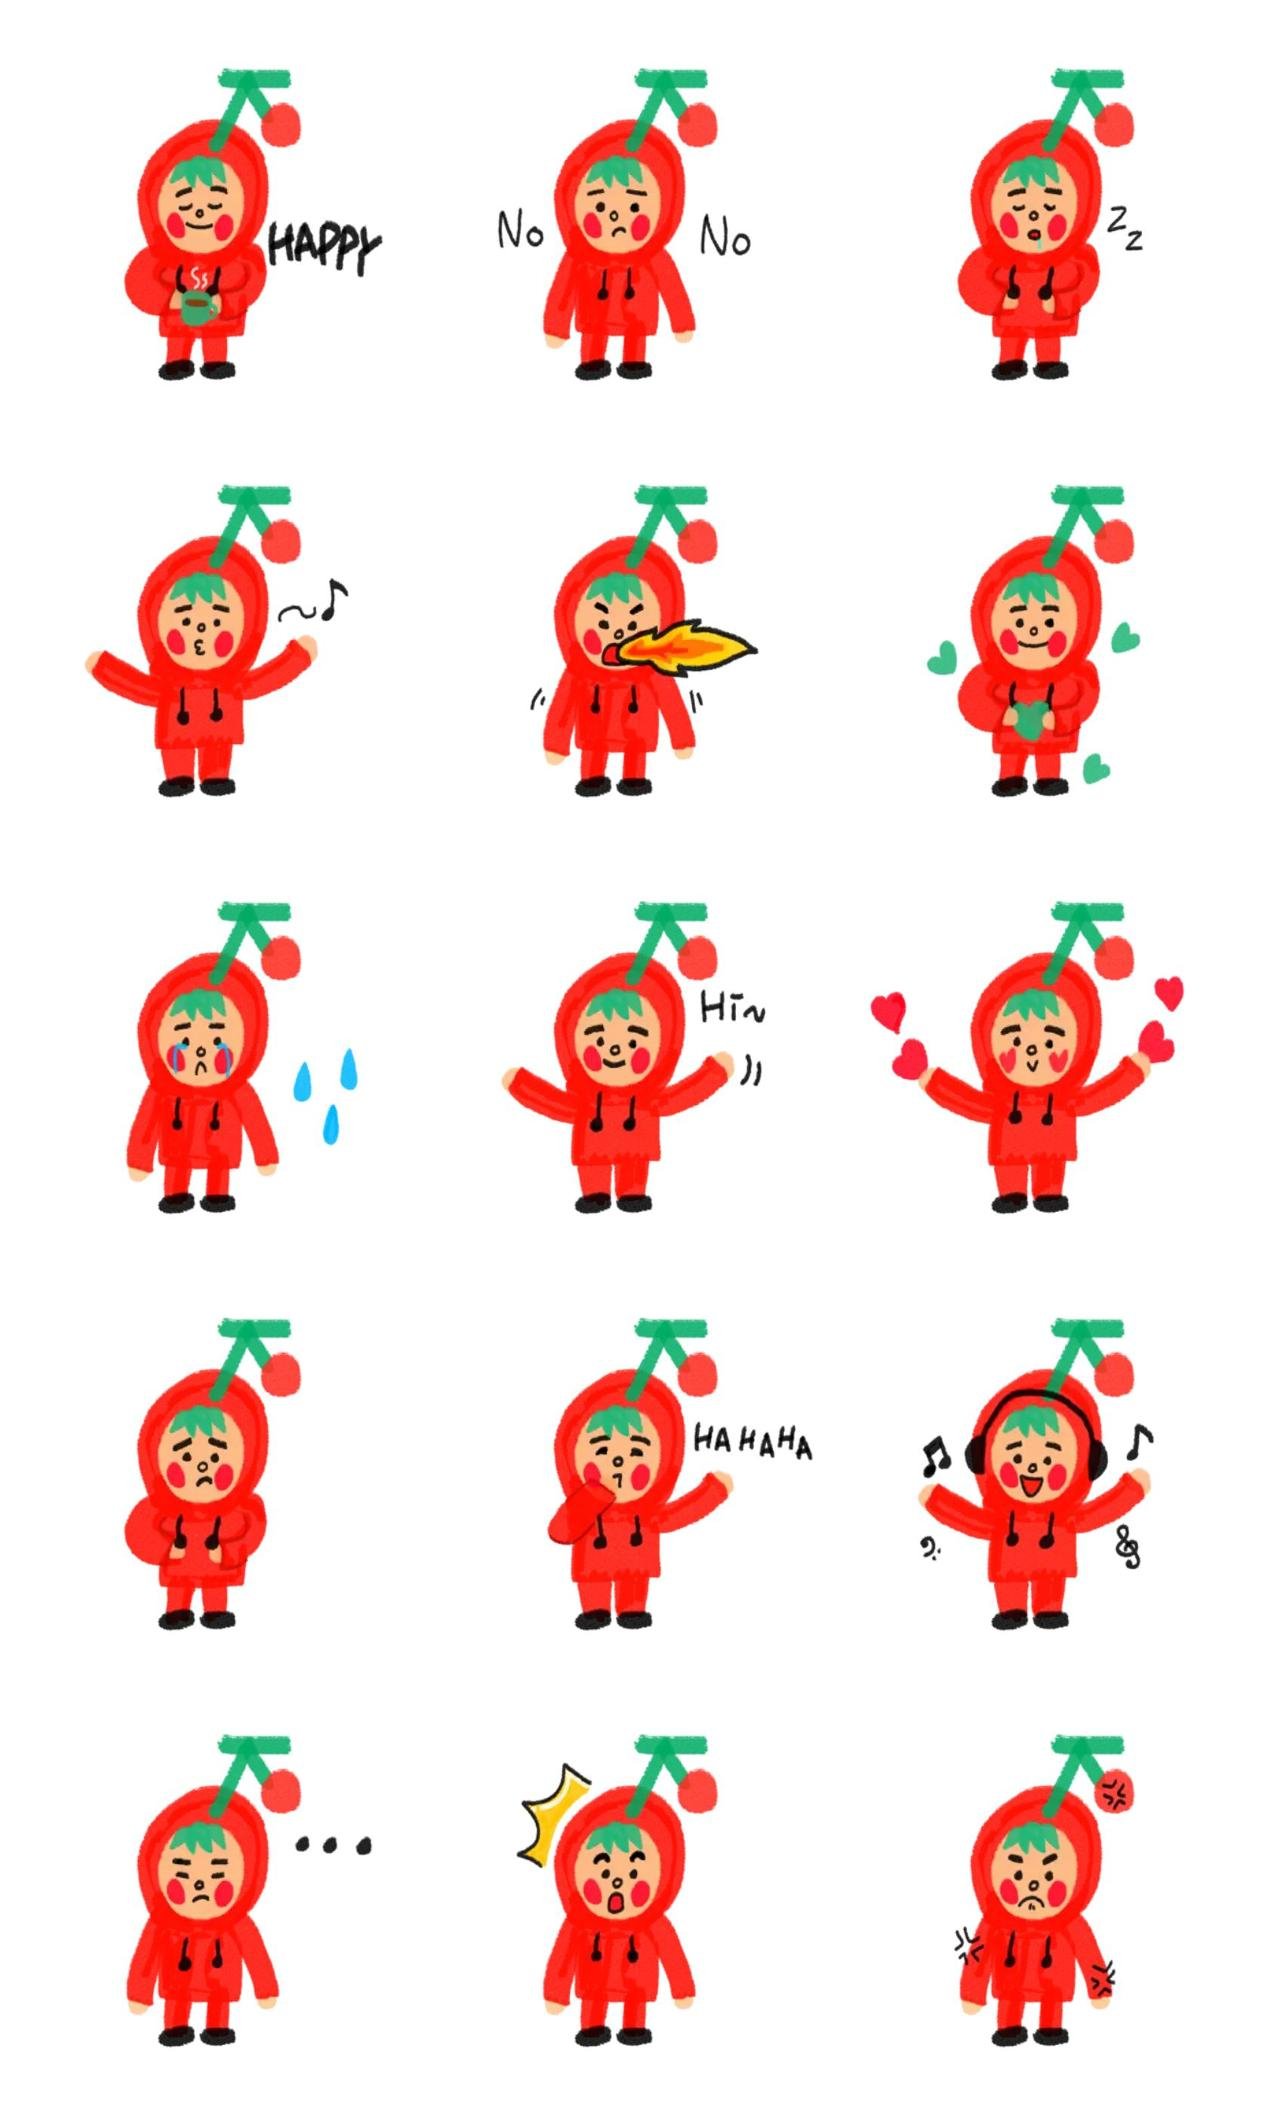 Cherry Boy Food/Drink sticker pack for Whatsapp, Telegram, Signal, and others chatting and message apps